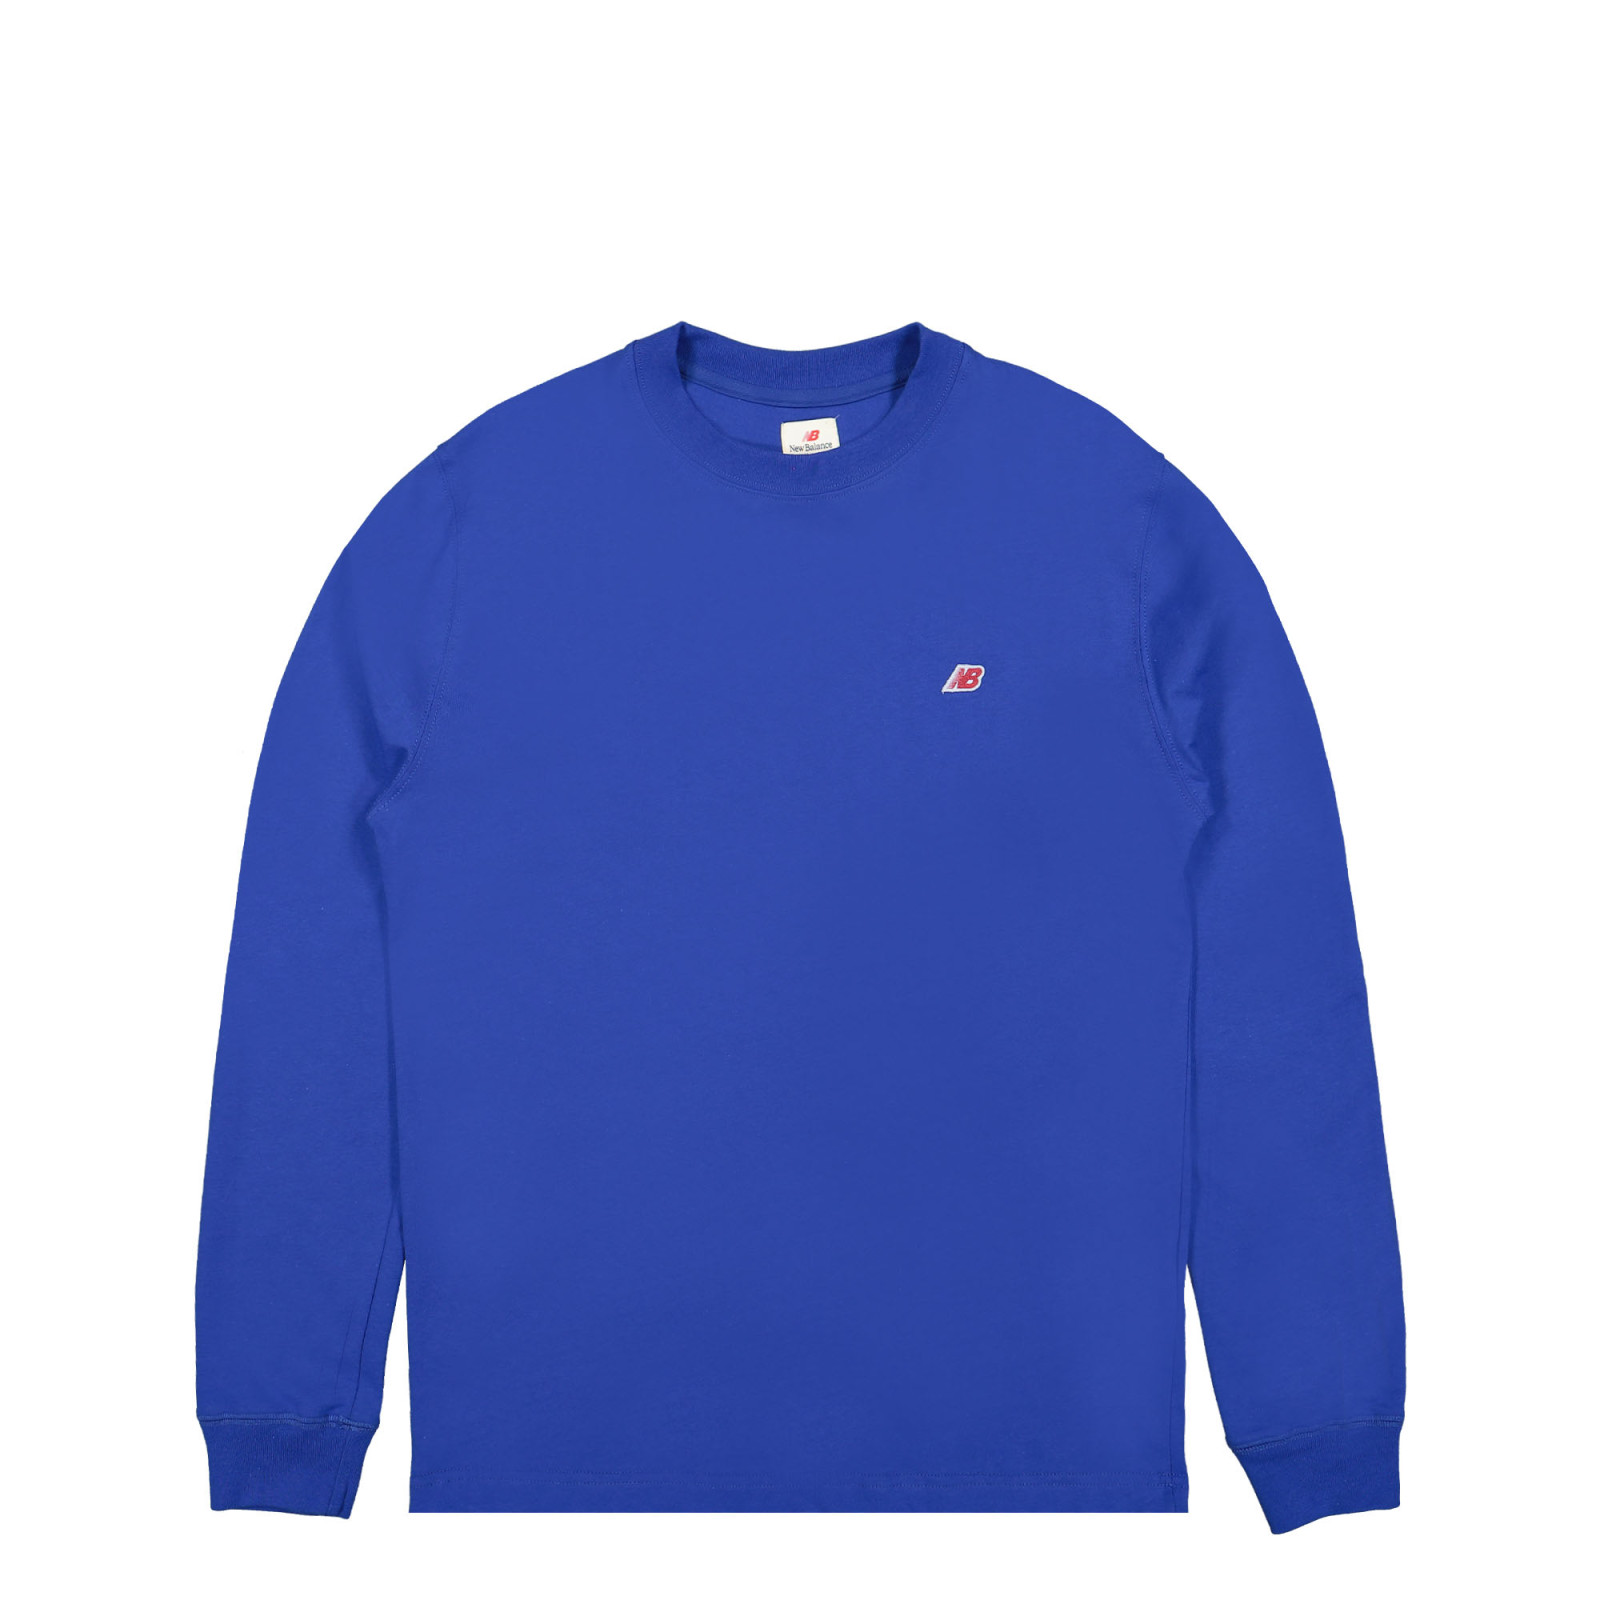 New Balance Made In USA
Core LS Tee
Blue